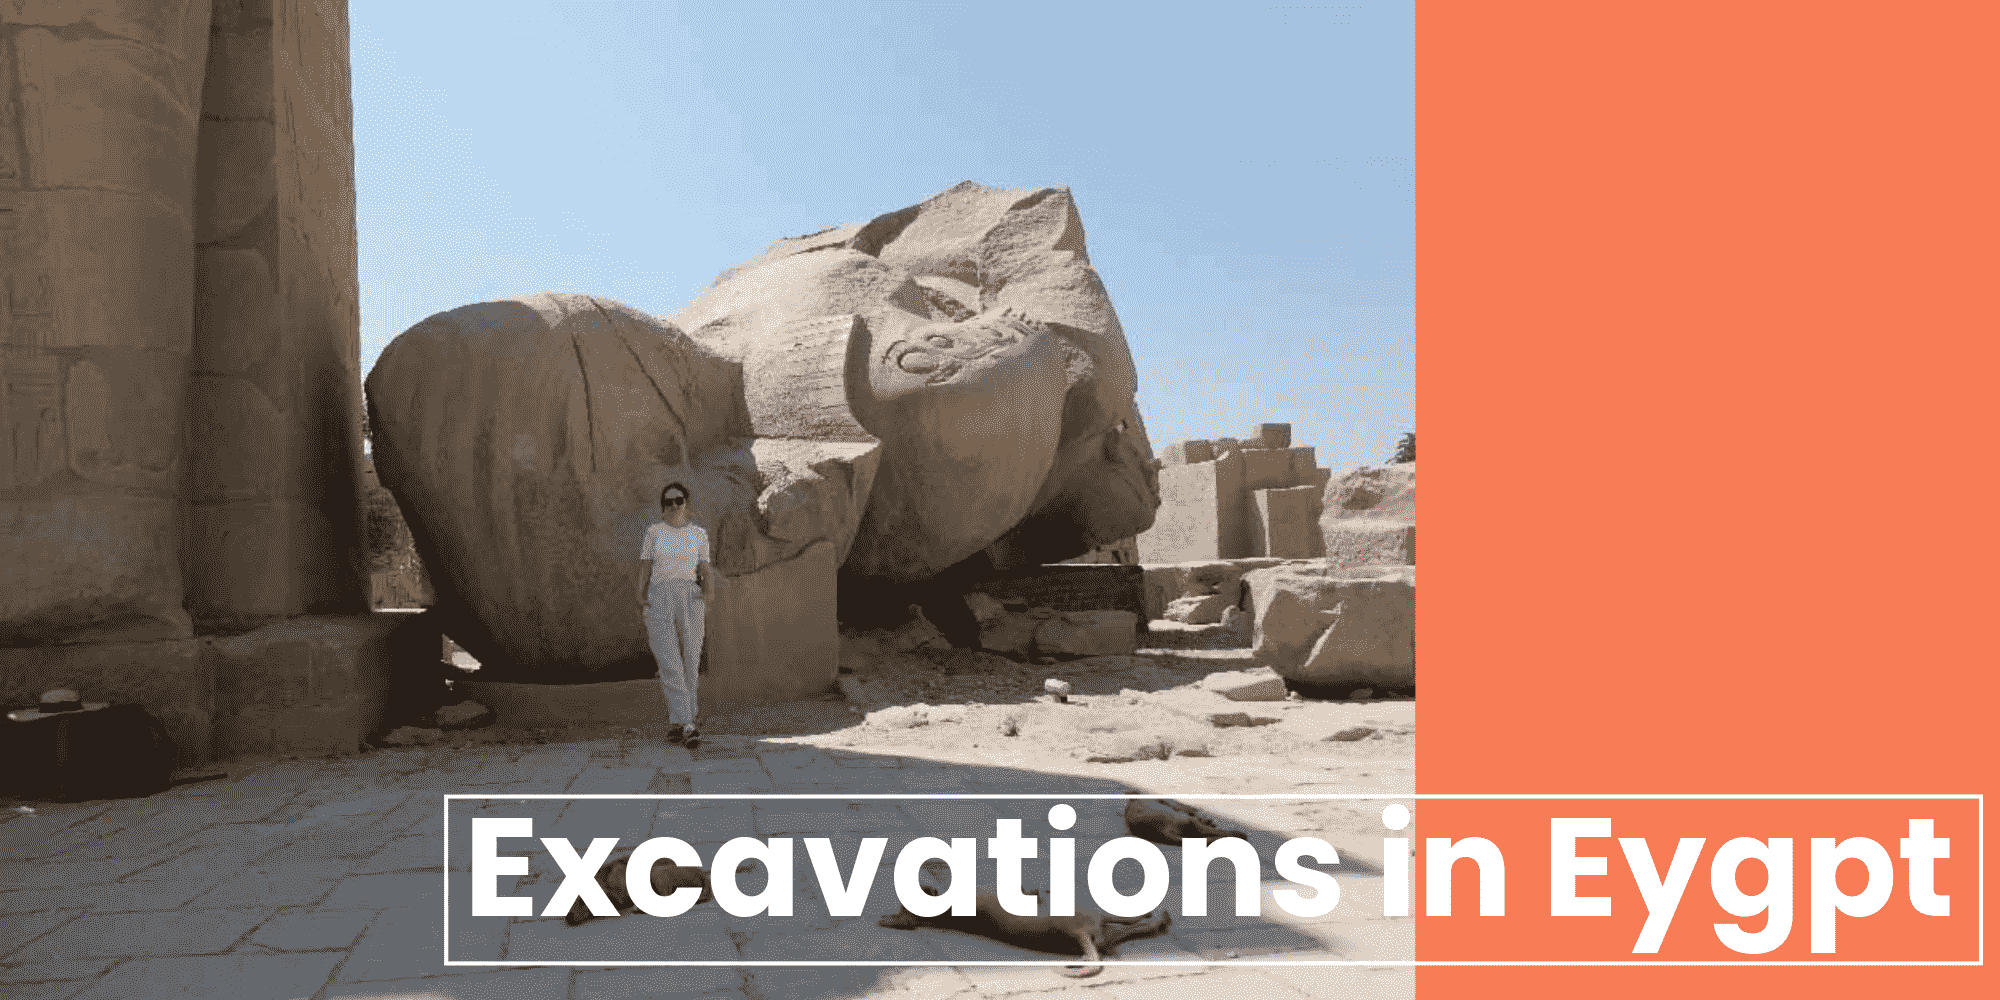 Excavations at the Mut Precinct in Luxor, Egypt